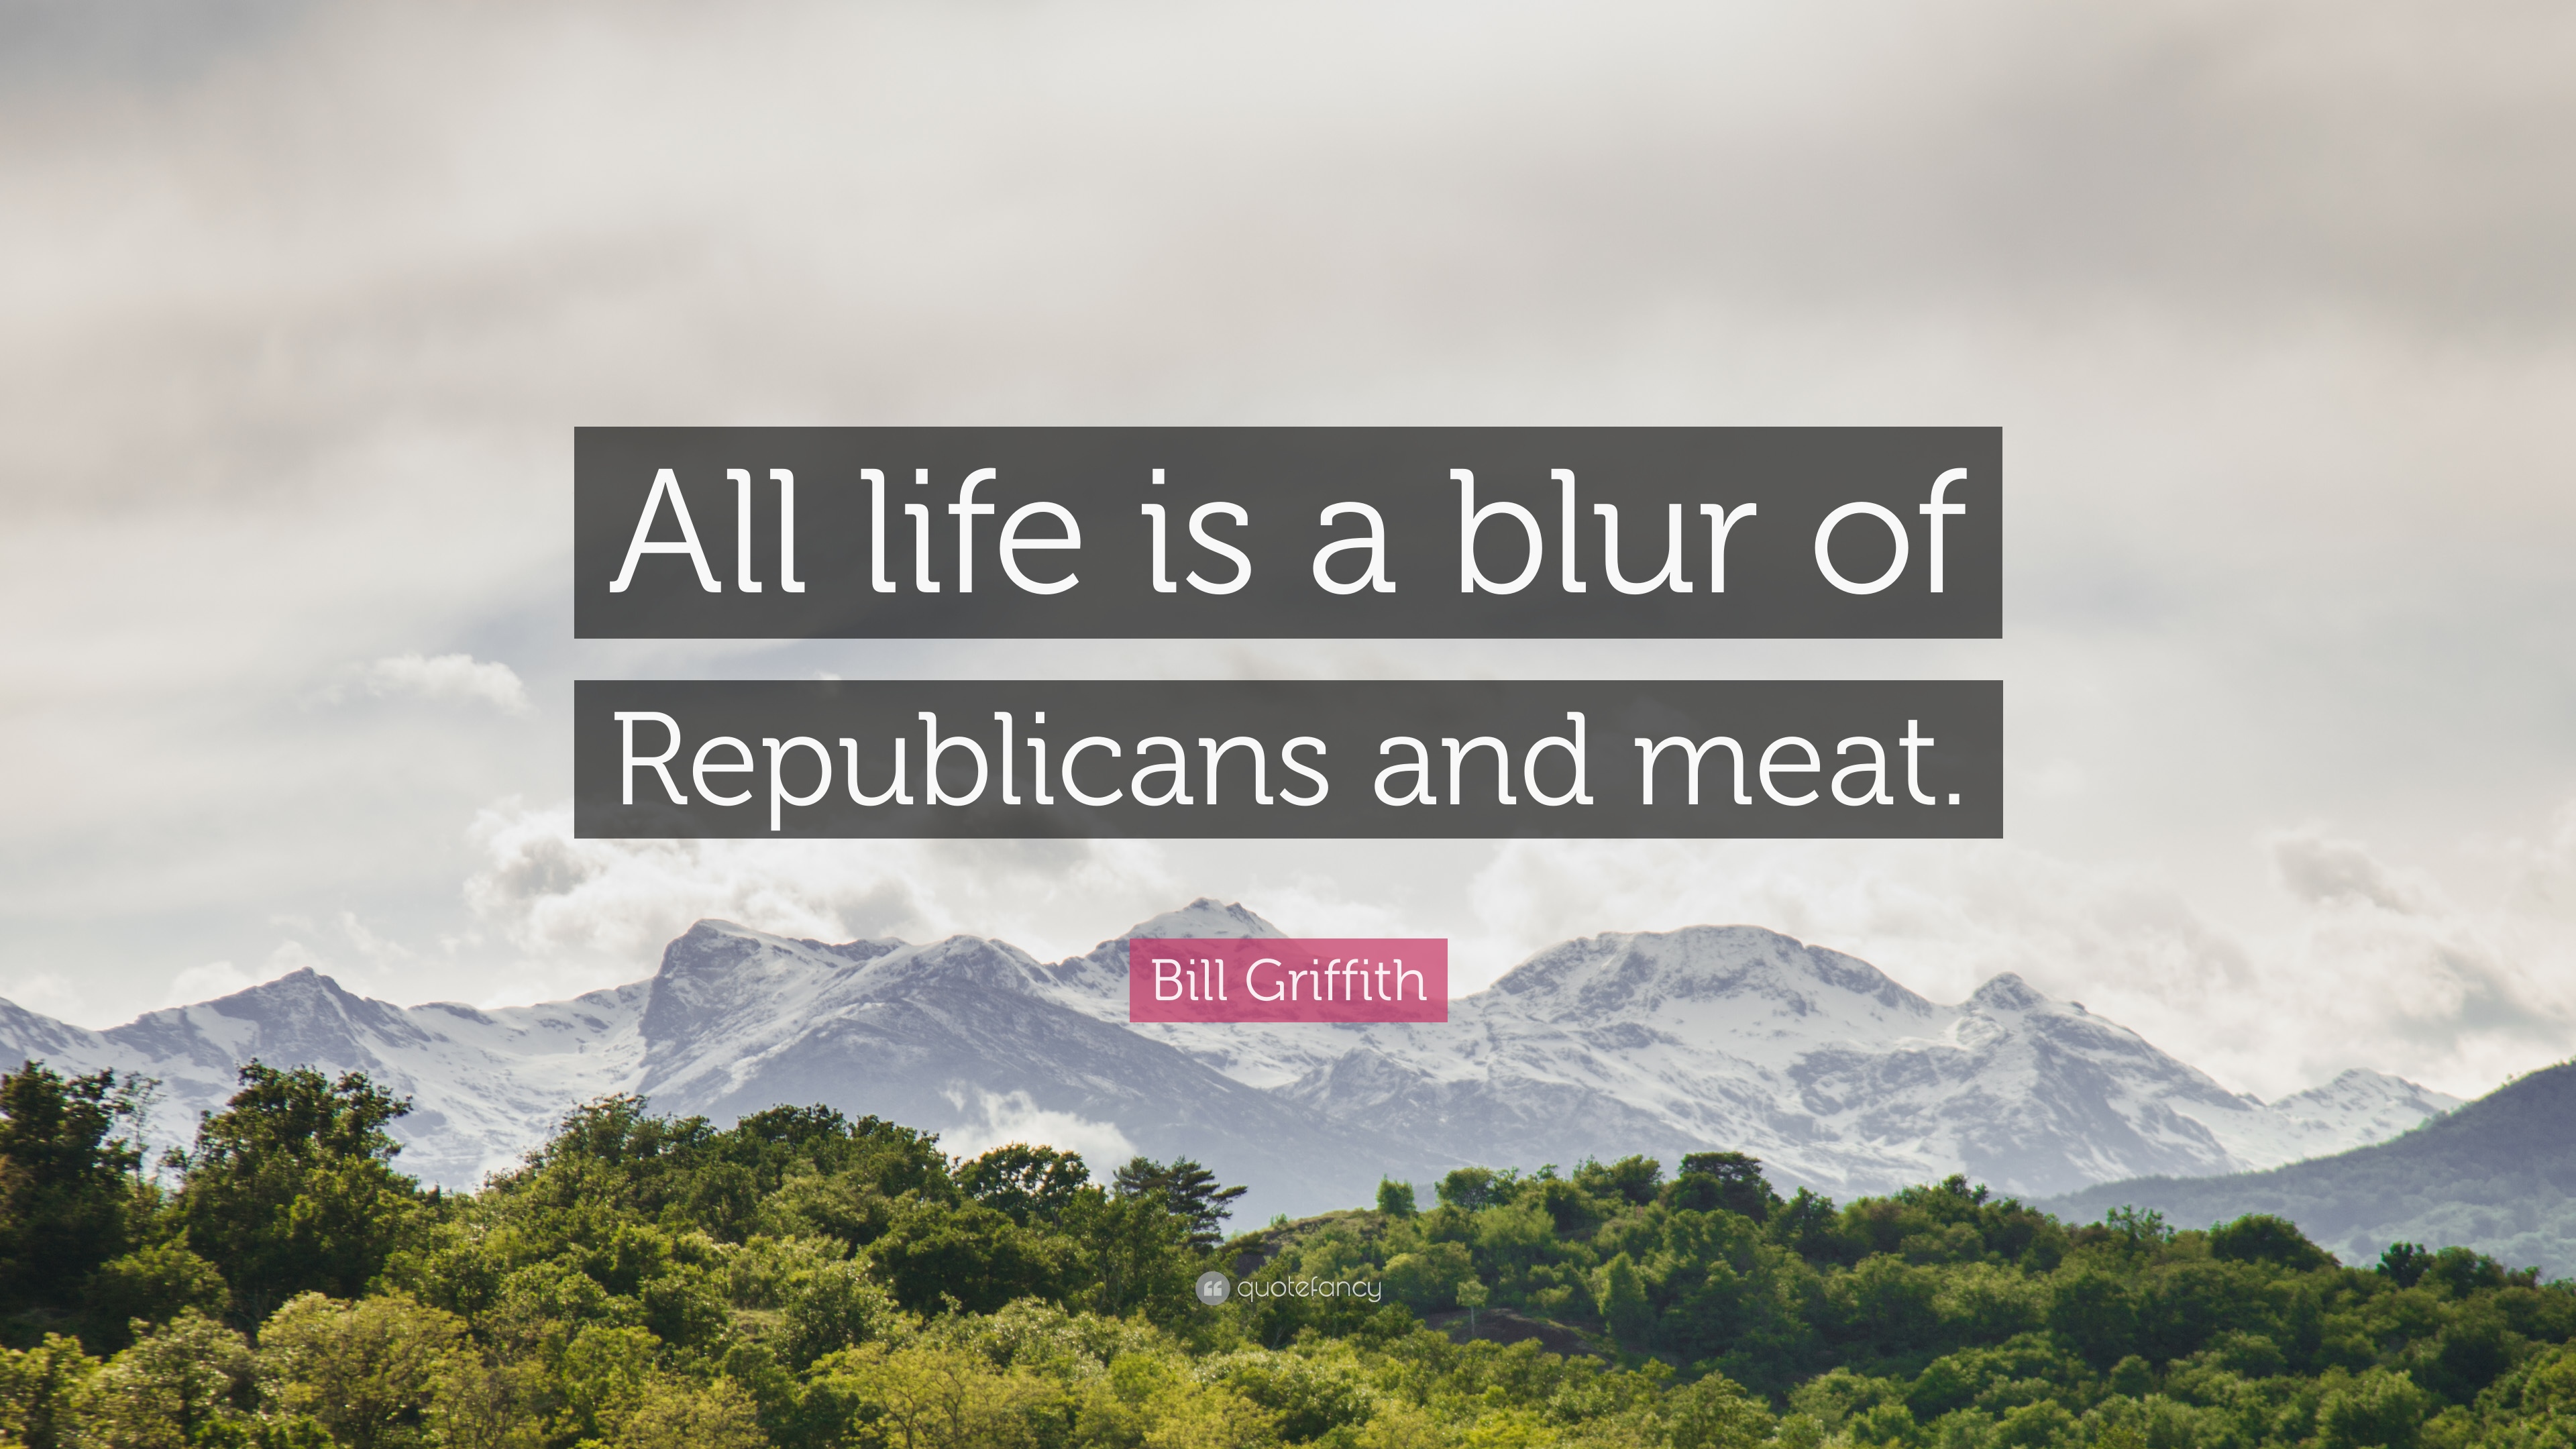 Bill Griffith Quote: “All life is a blur of Republicans